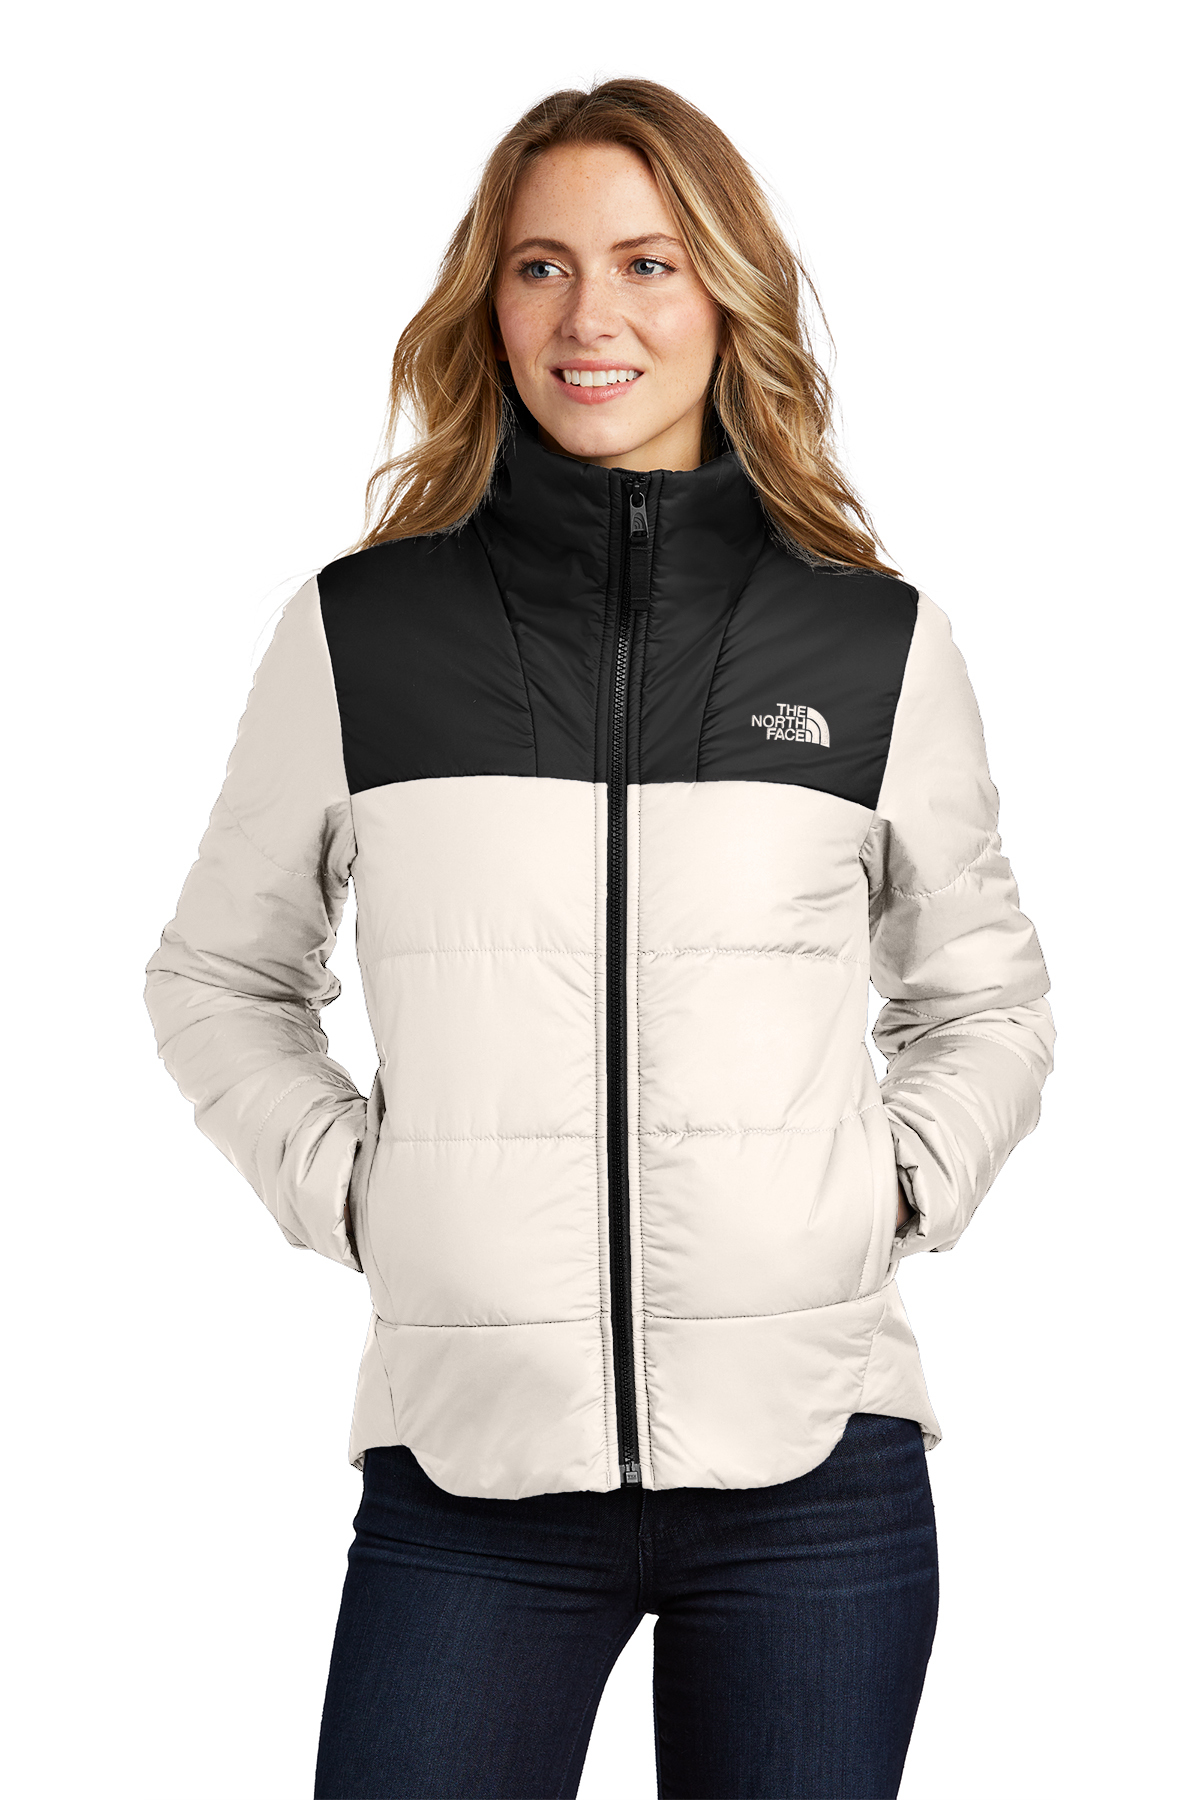 The North Face Ladies Chest Logo Everyday Insulated Jacket | Product ...